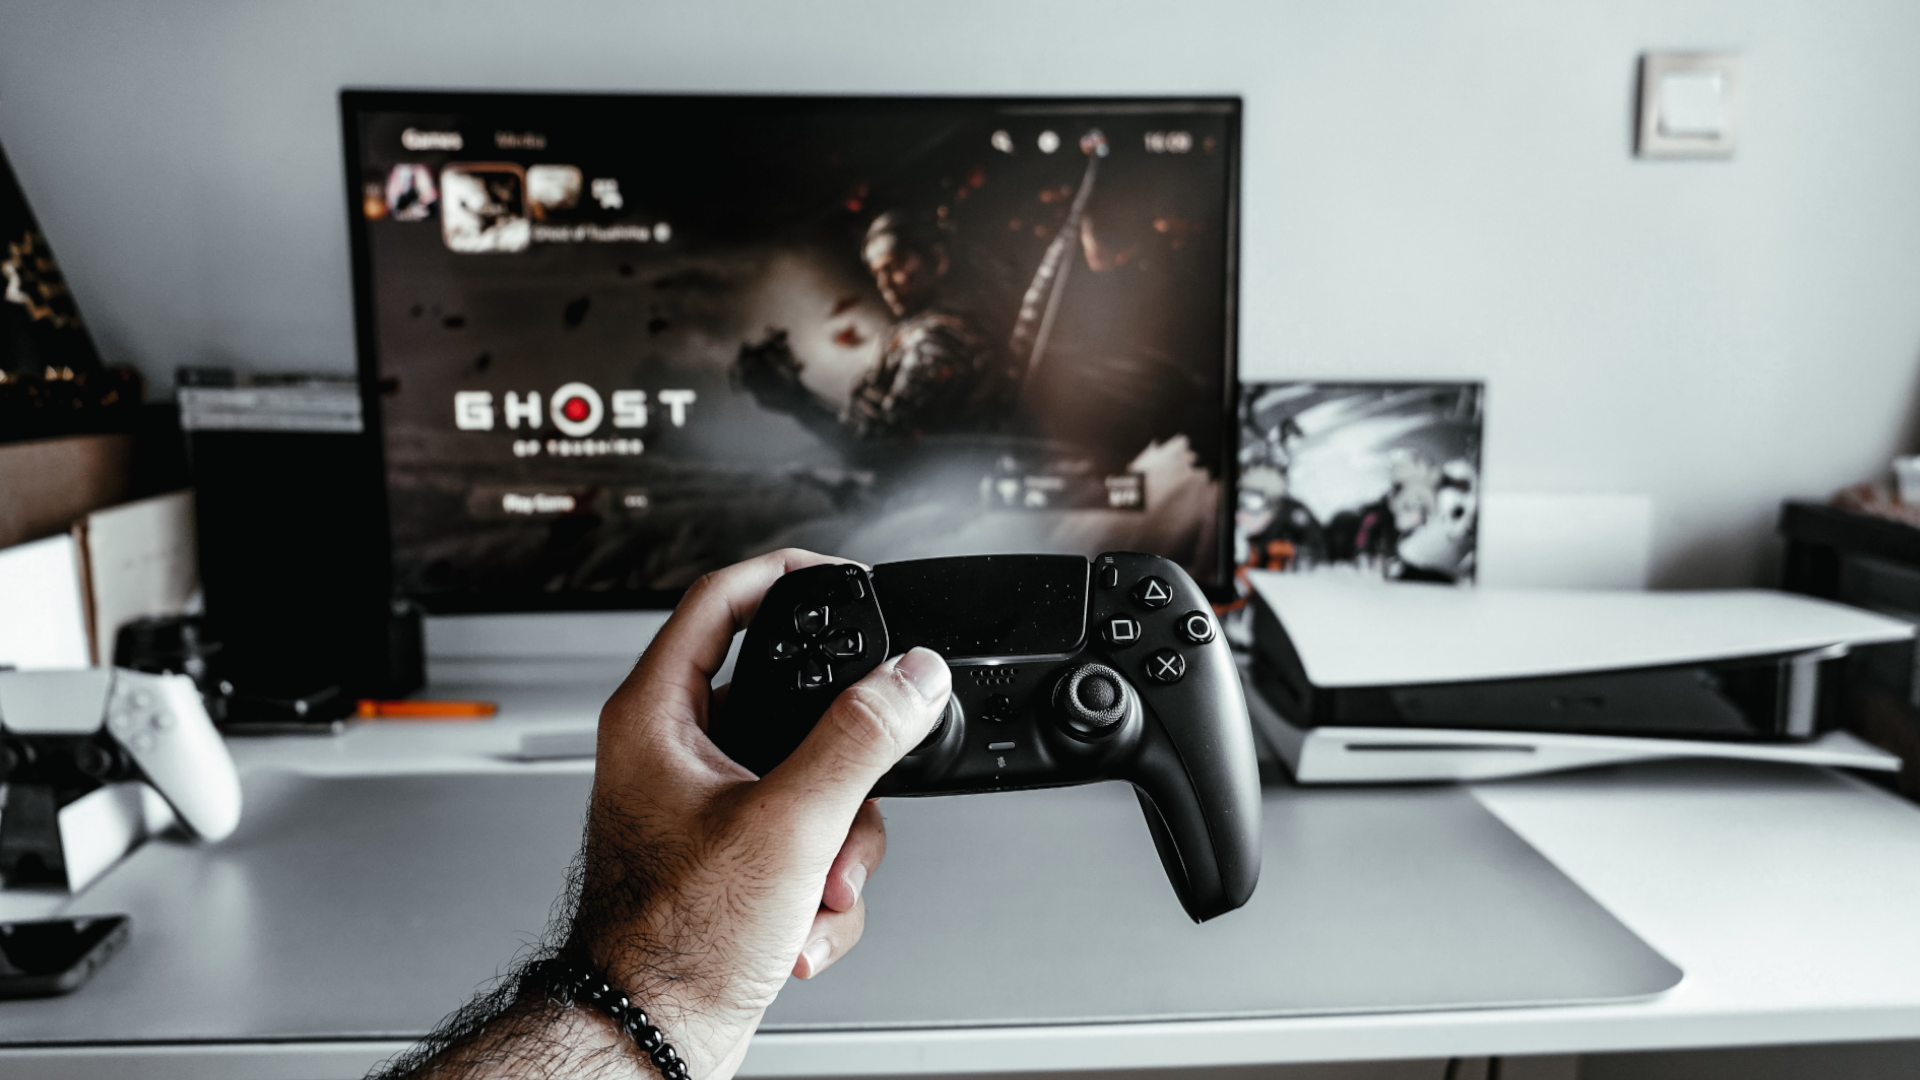 Man's hand holding black PS5 DualSense controller in front of a TV displaying Ghost of Tsushima